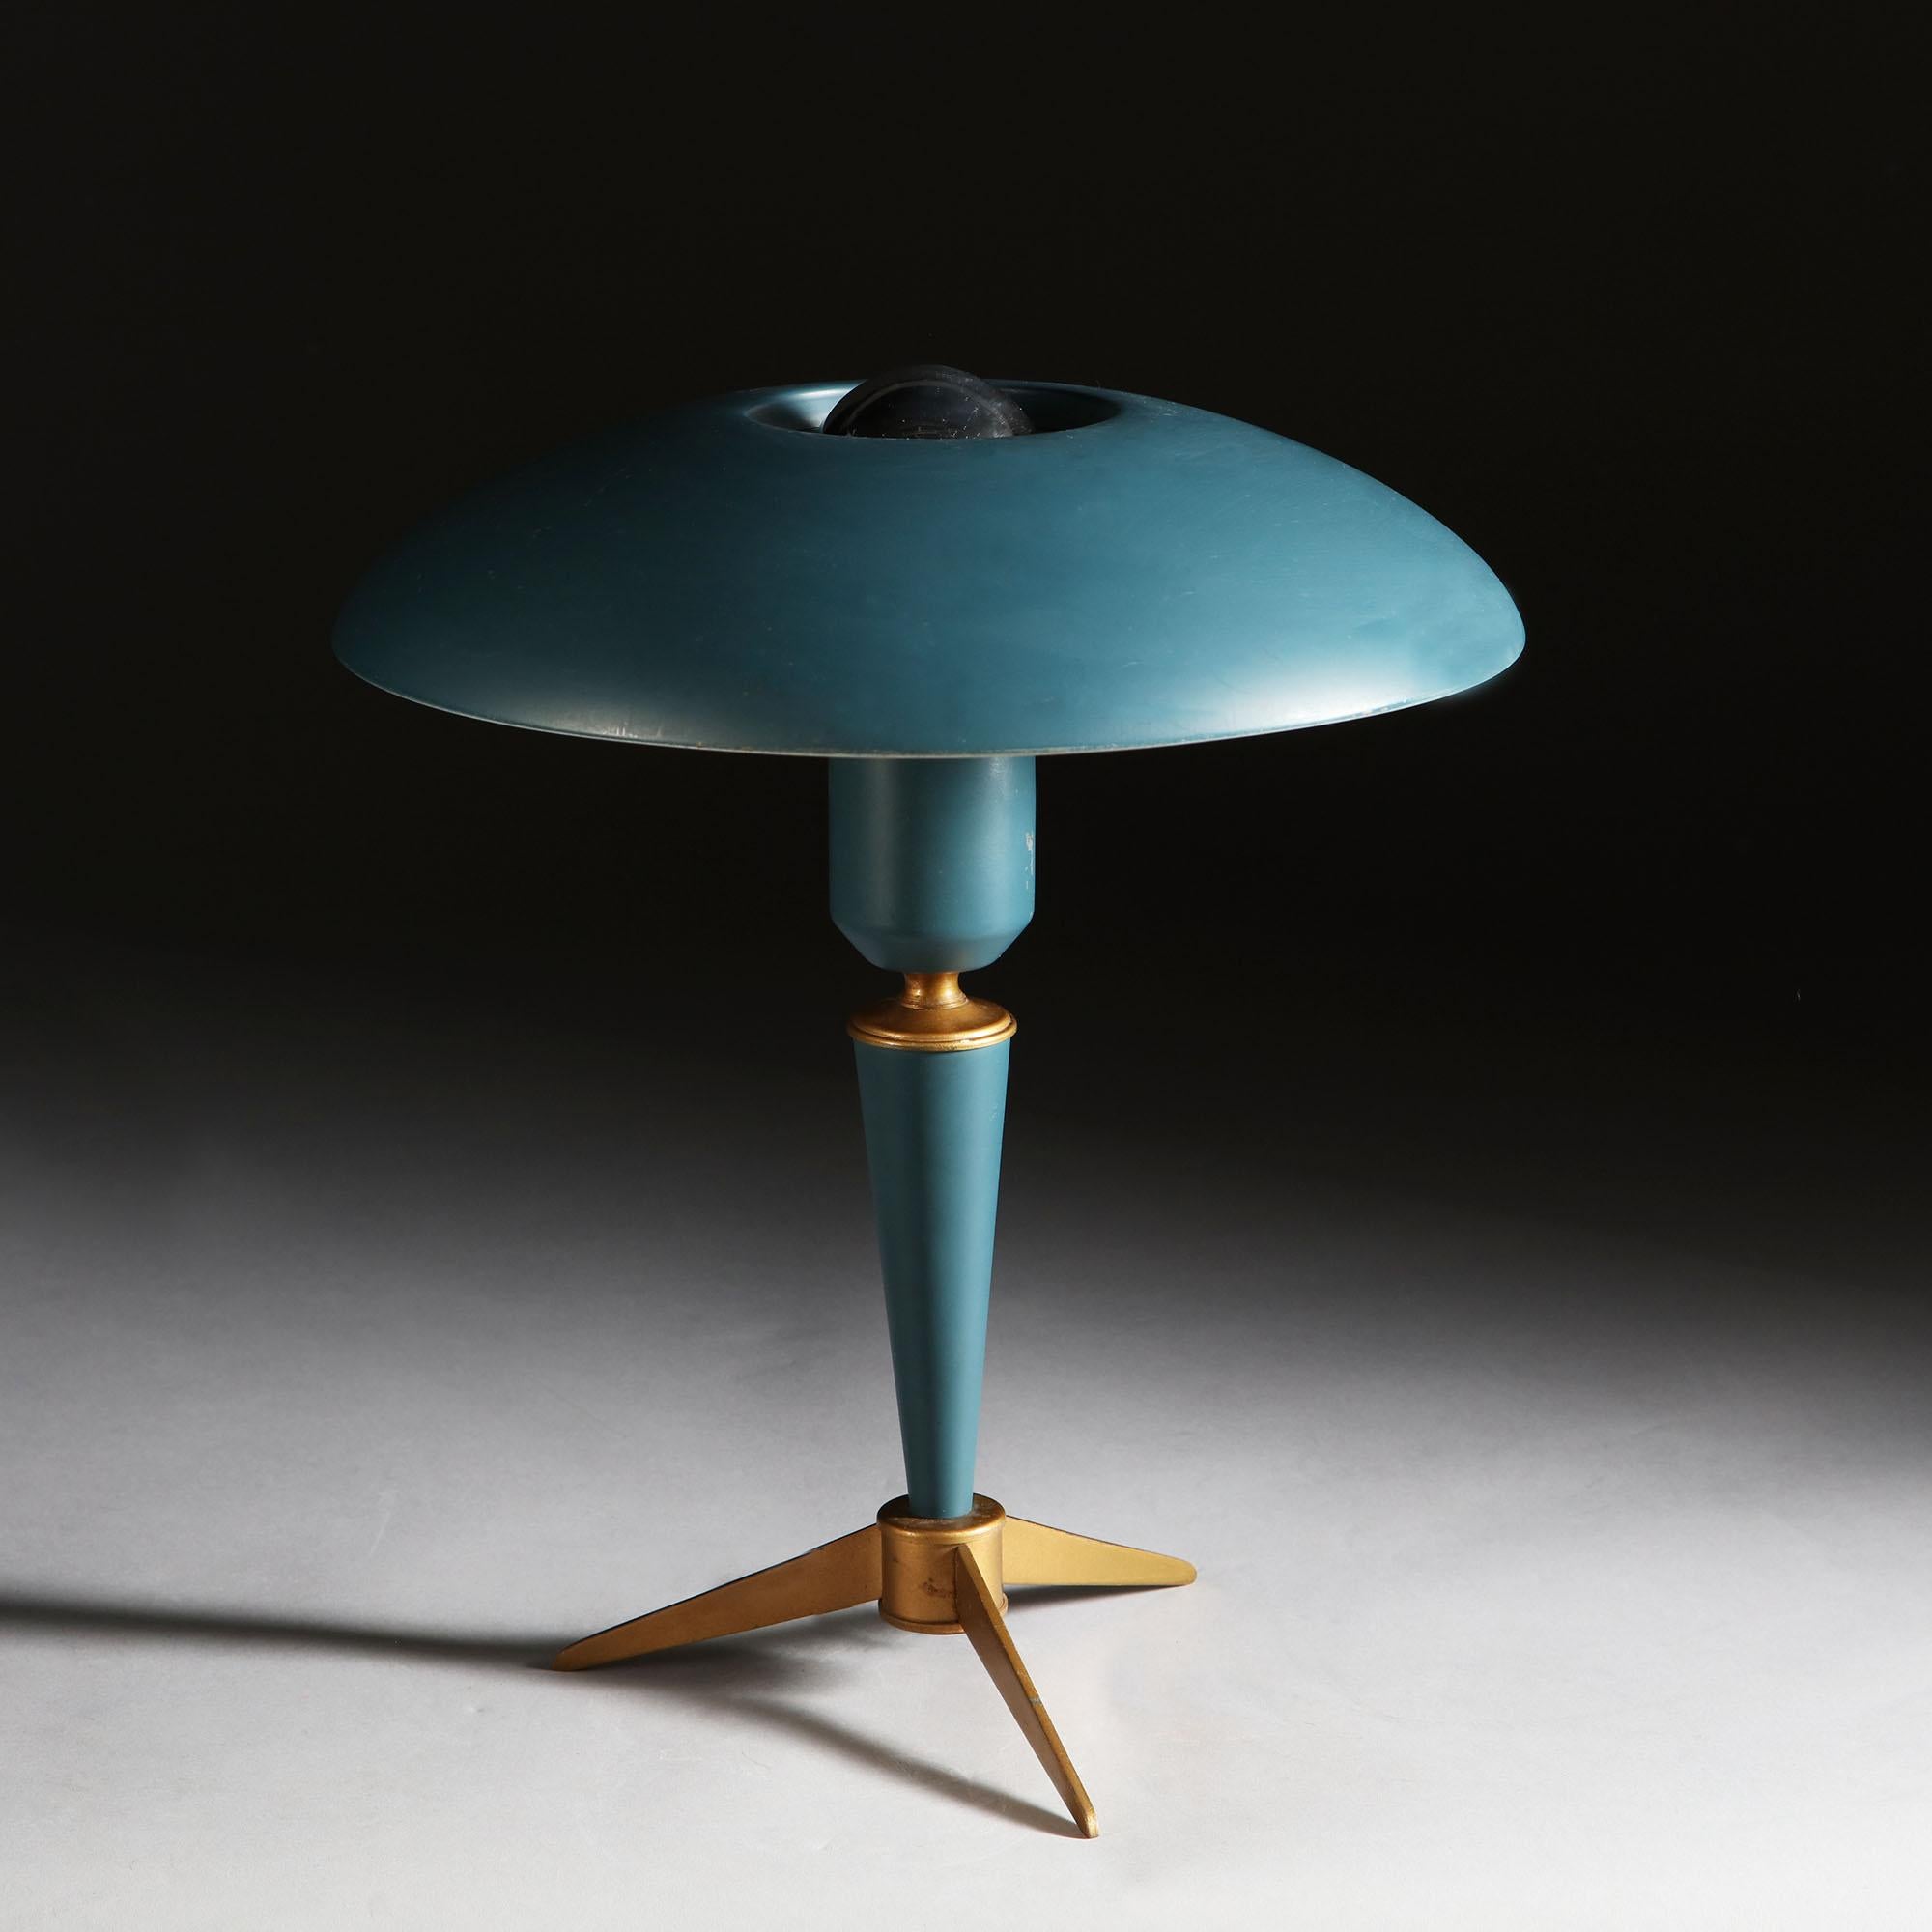 A mid-20th century tripod desk lamp in brass and green painted metal, designed in 1958 by Louis Kalff for Philips, Eindhoven. Model TL1012.

Currently wired for the UK. Please enquire for rewiring services.